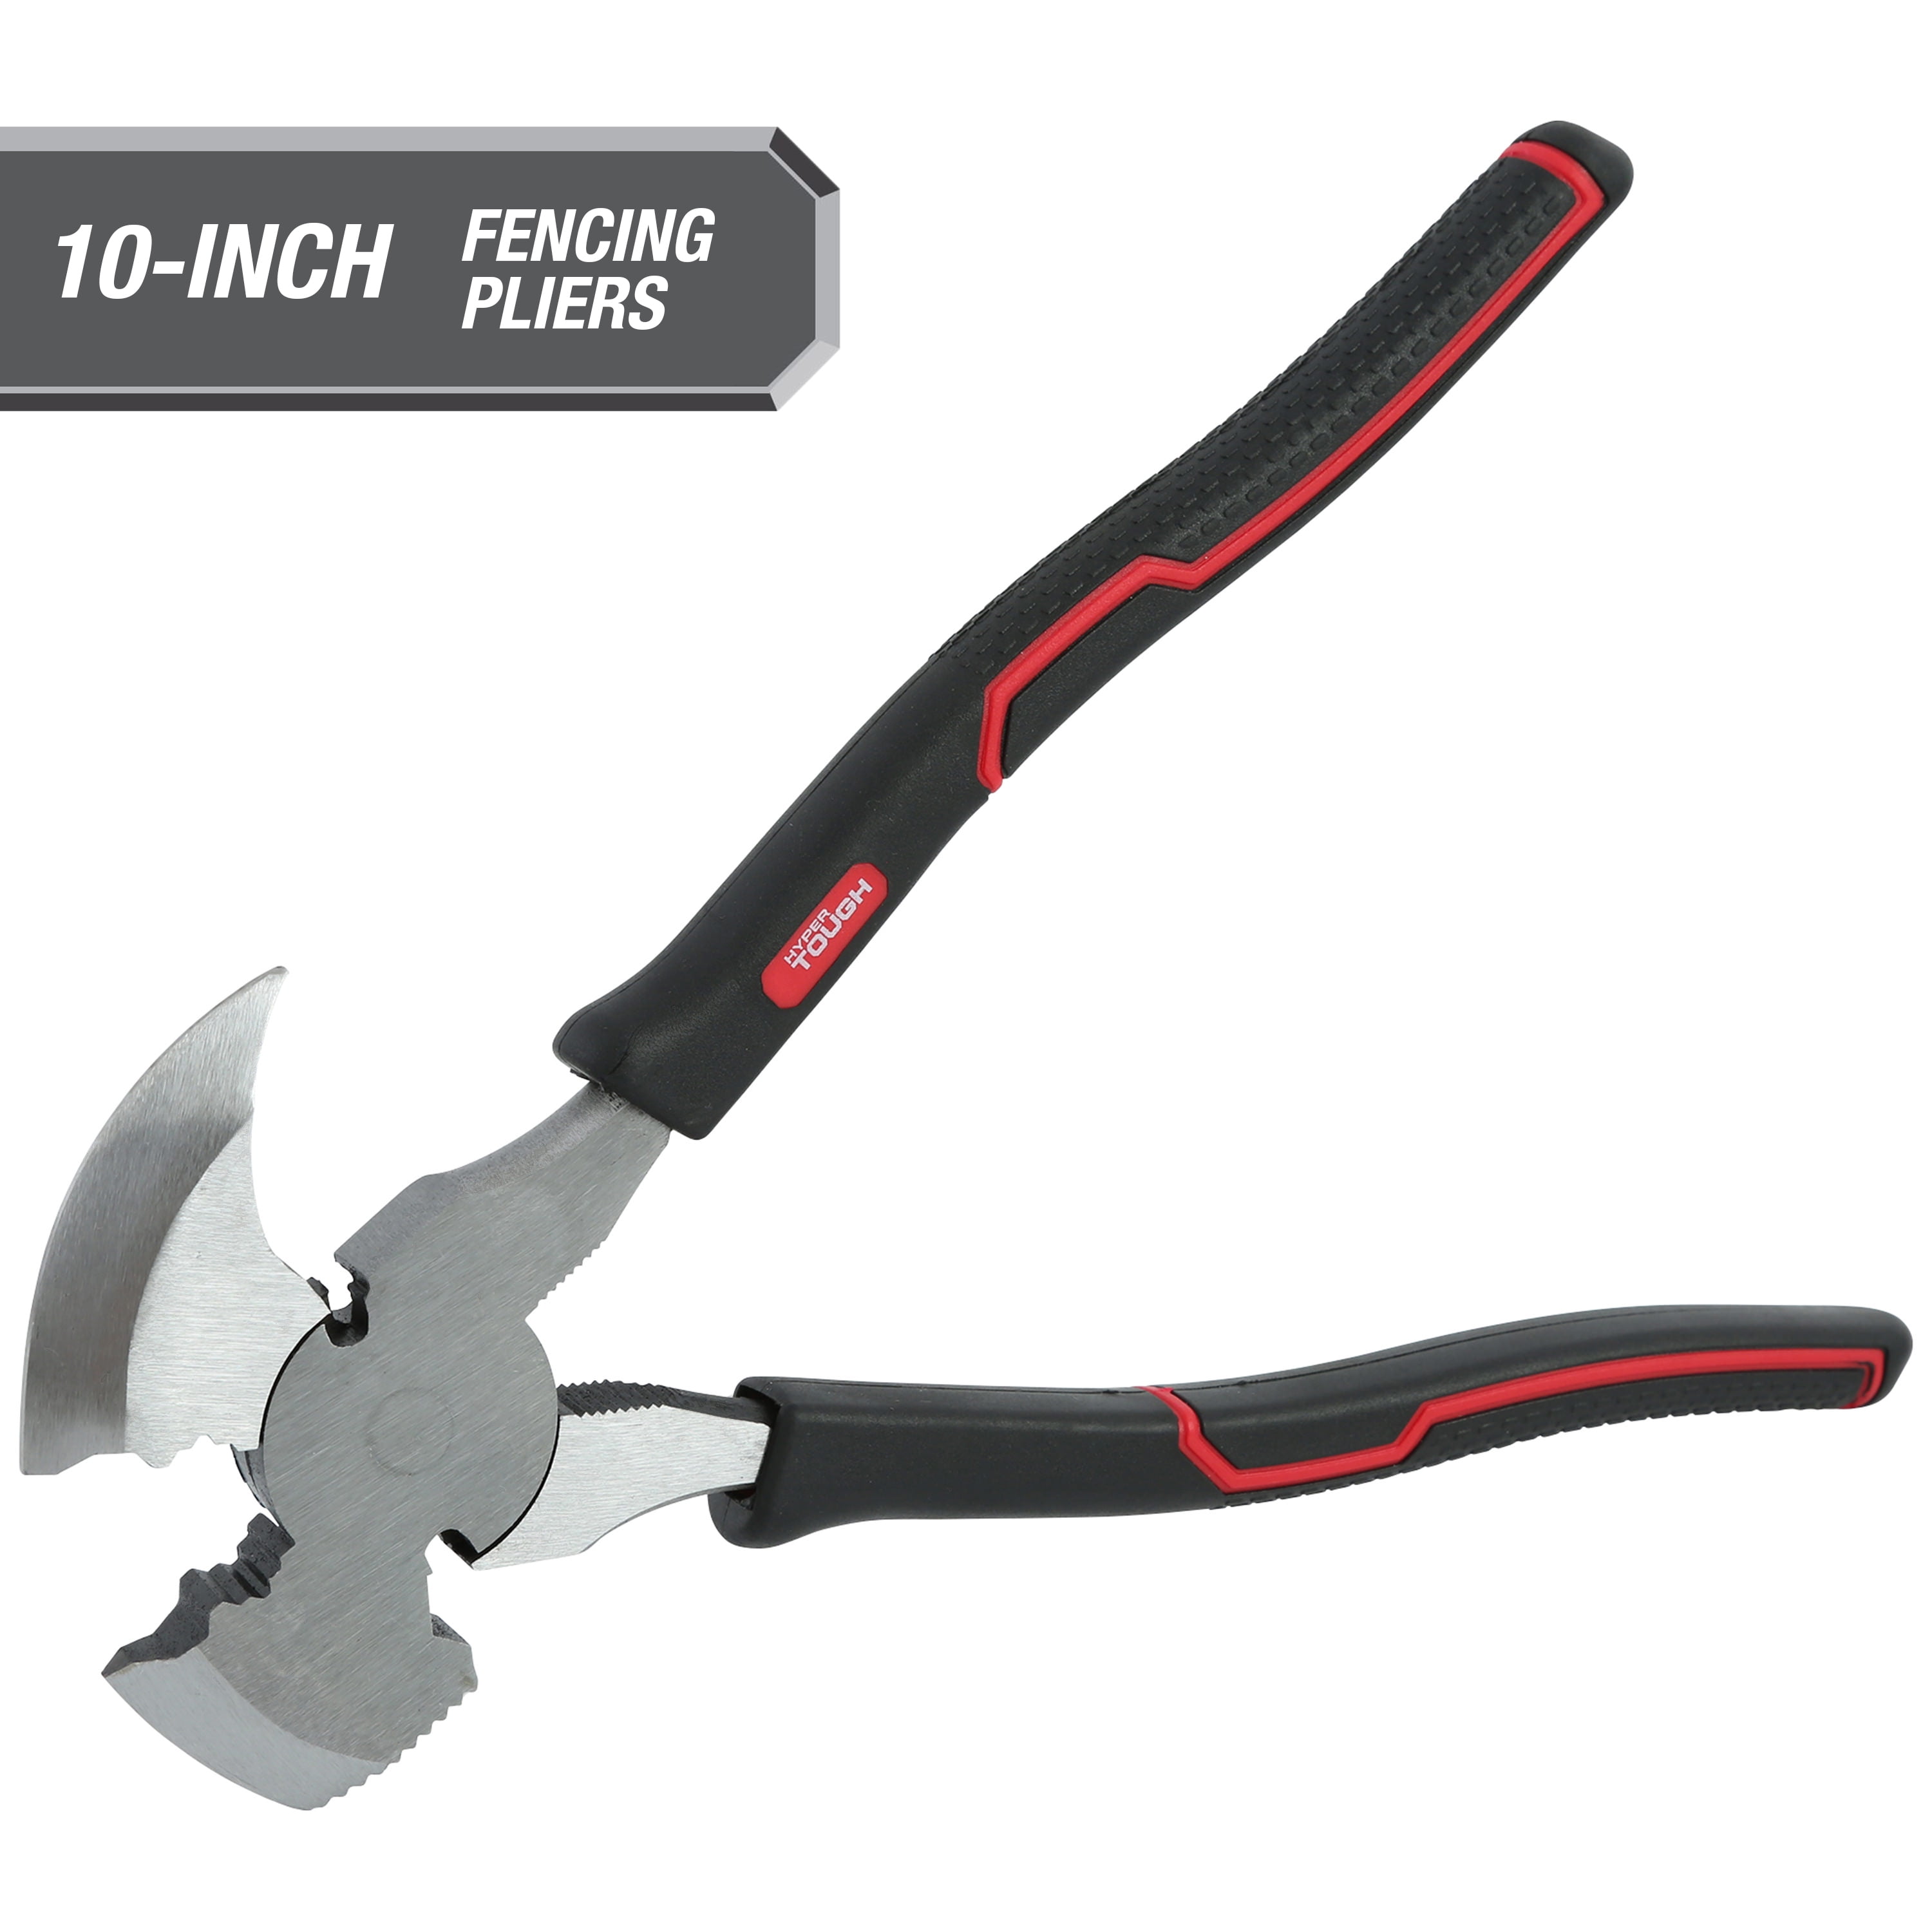 Hyper Tough 10-inch Demolition and Fencing Pliers with Soft Grip Handles